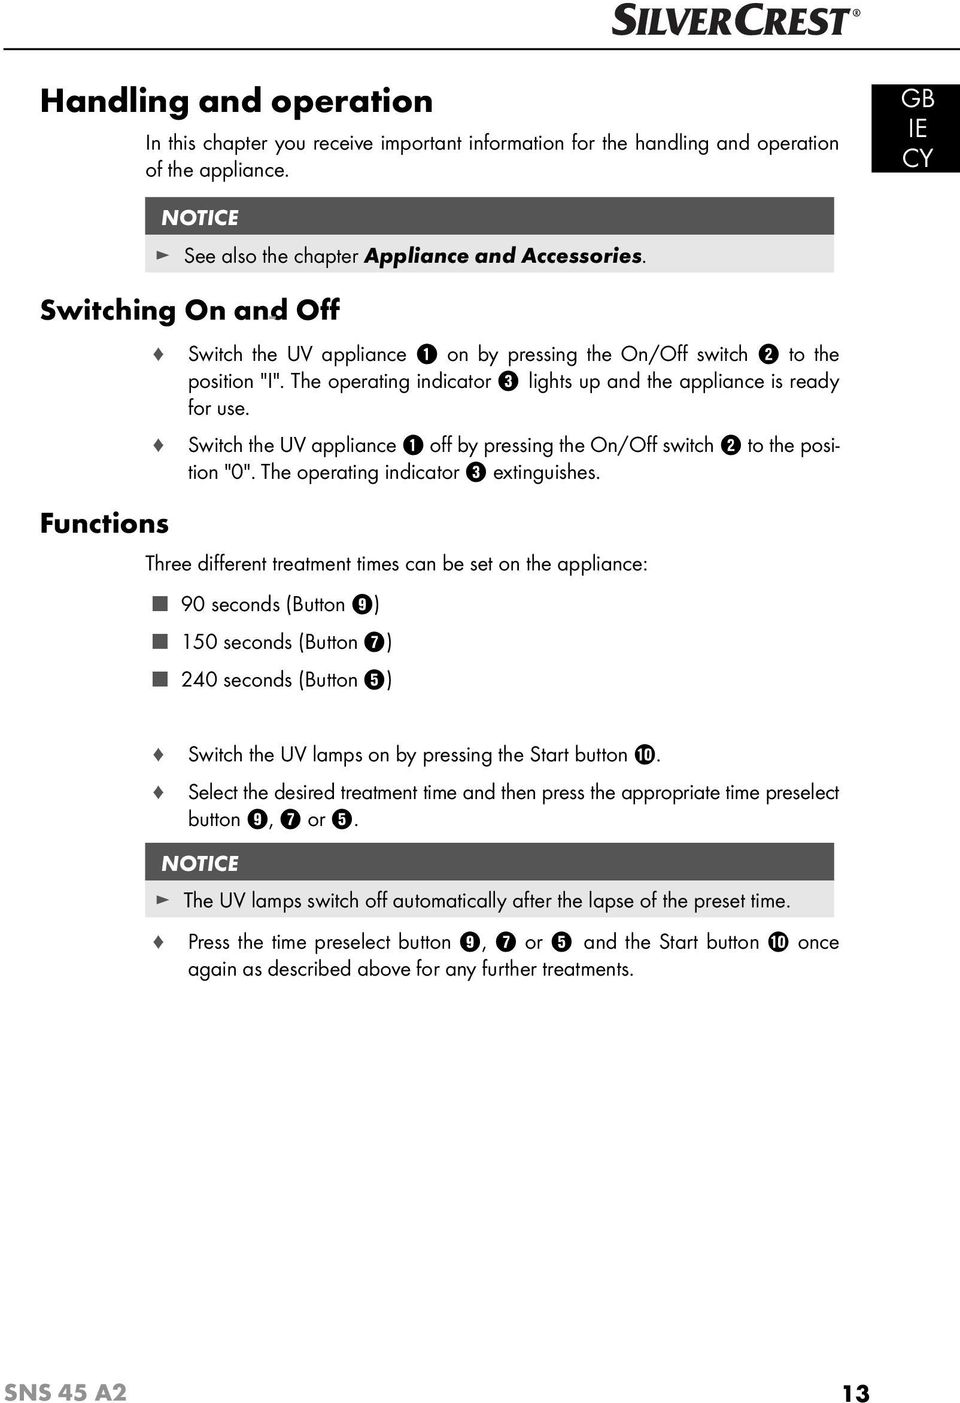 Switch the UV appliance 1 off by pressing the On/Off switch 2 to the position "0". The operating indicator 3 extinguishes.